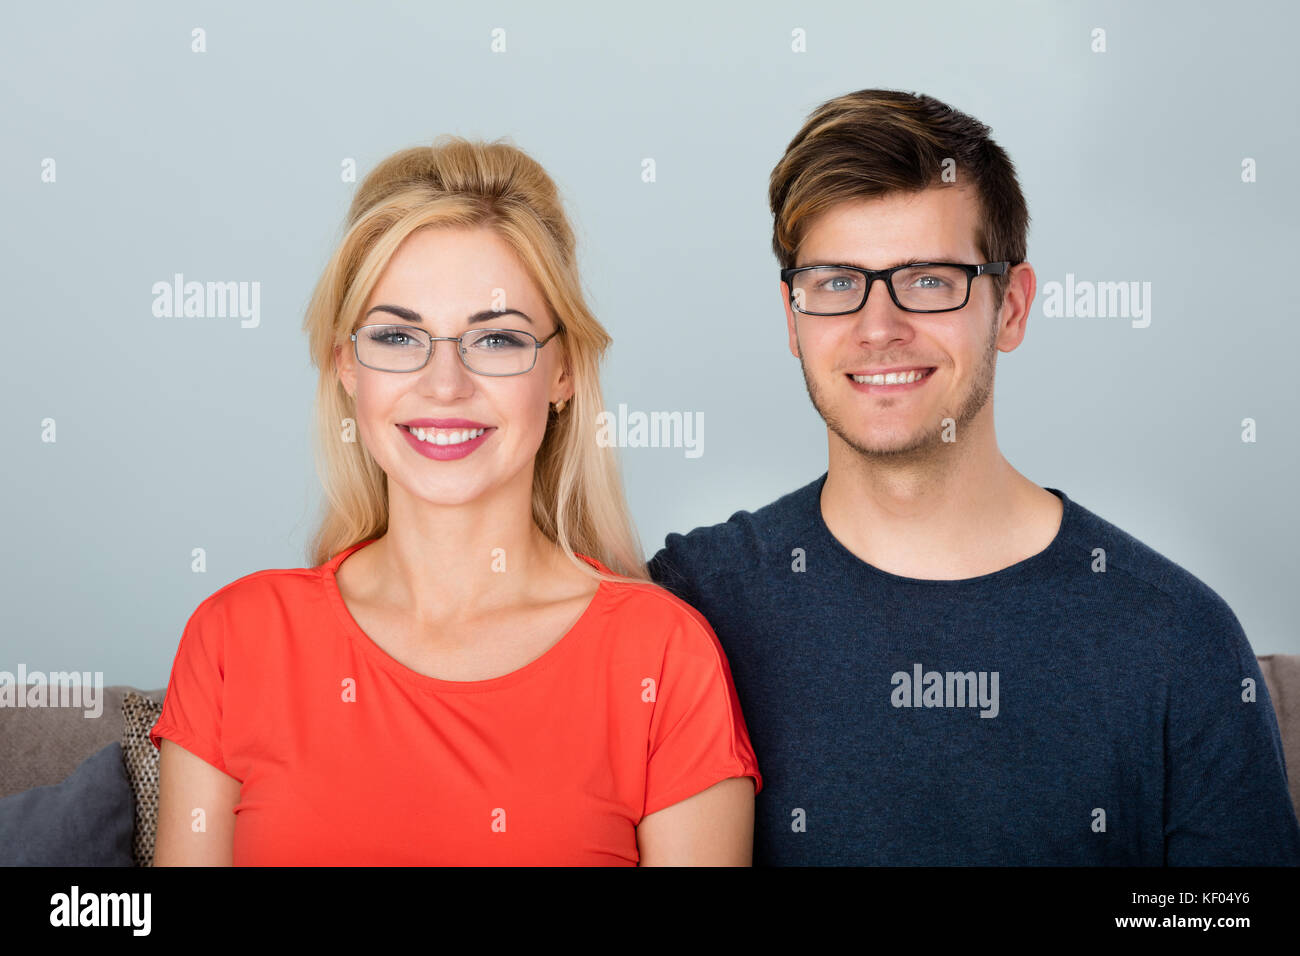 Portrait Of Young Smiling Couple Wearing Glasses Stock Photo